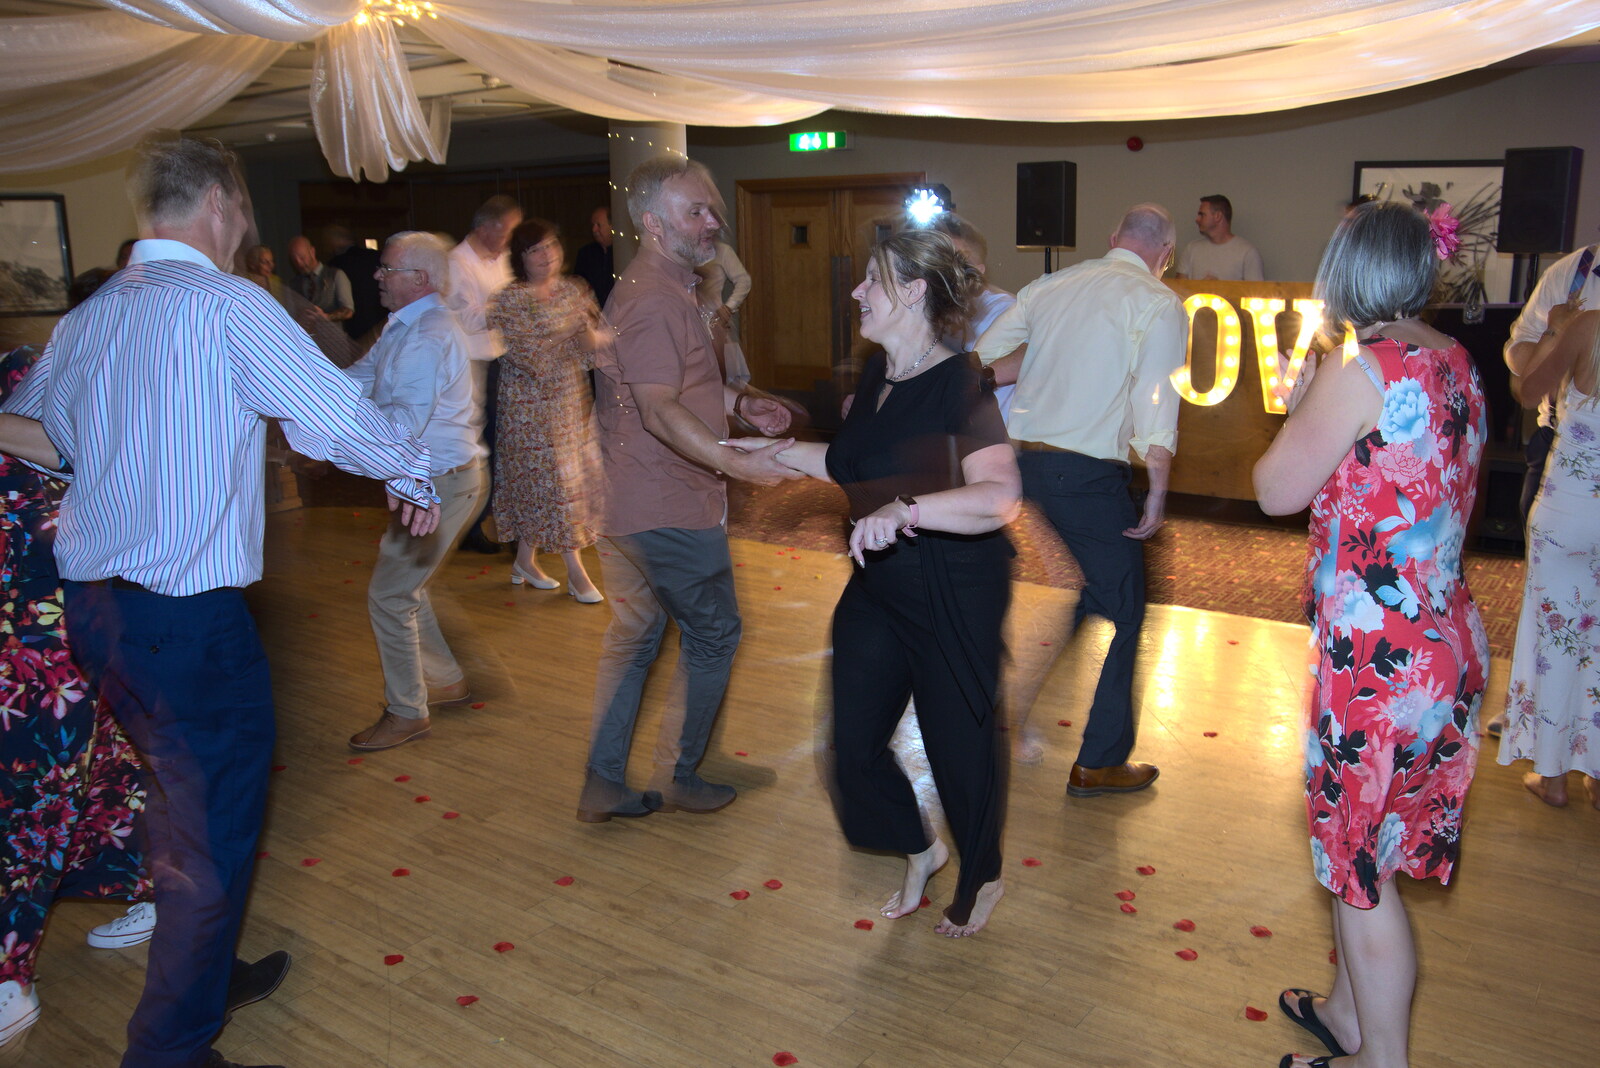 The dancing continues from Petay's Wedding Reception, Fanhams Hall, Ware, Hertfordshire - 20th August 2021